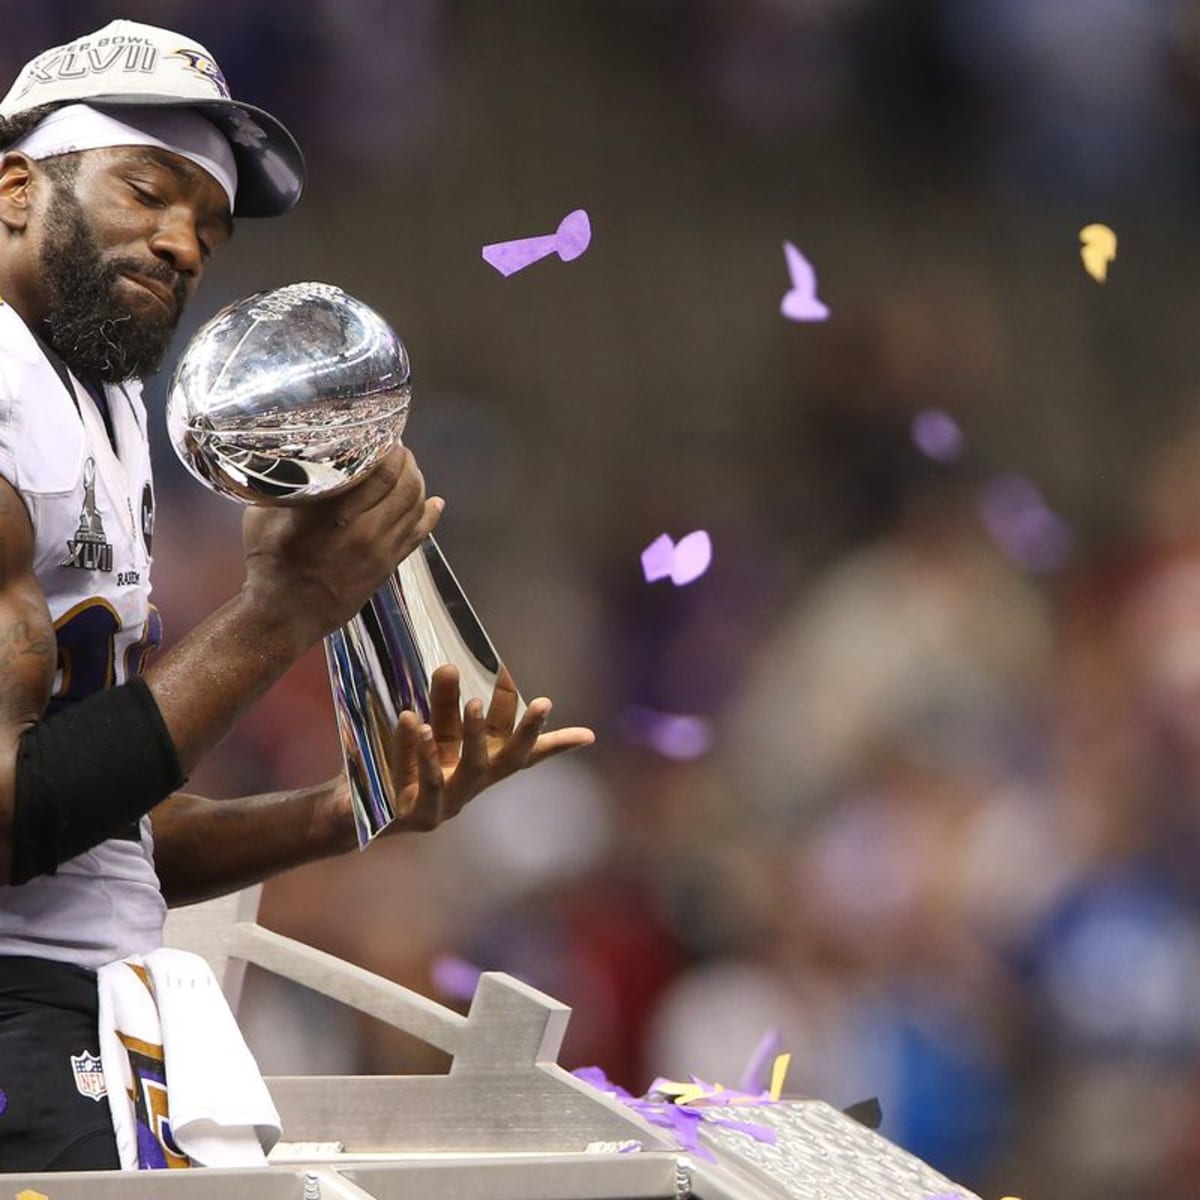 Baltimore Ravens determined to hold on to Ed Reed